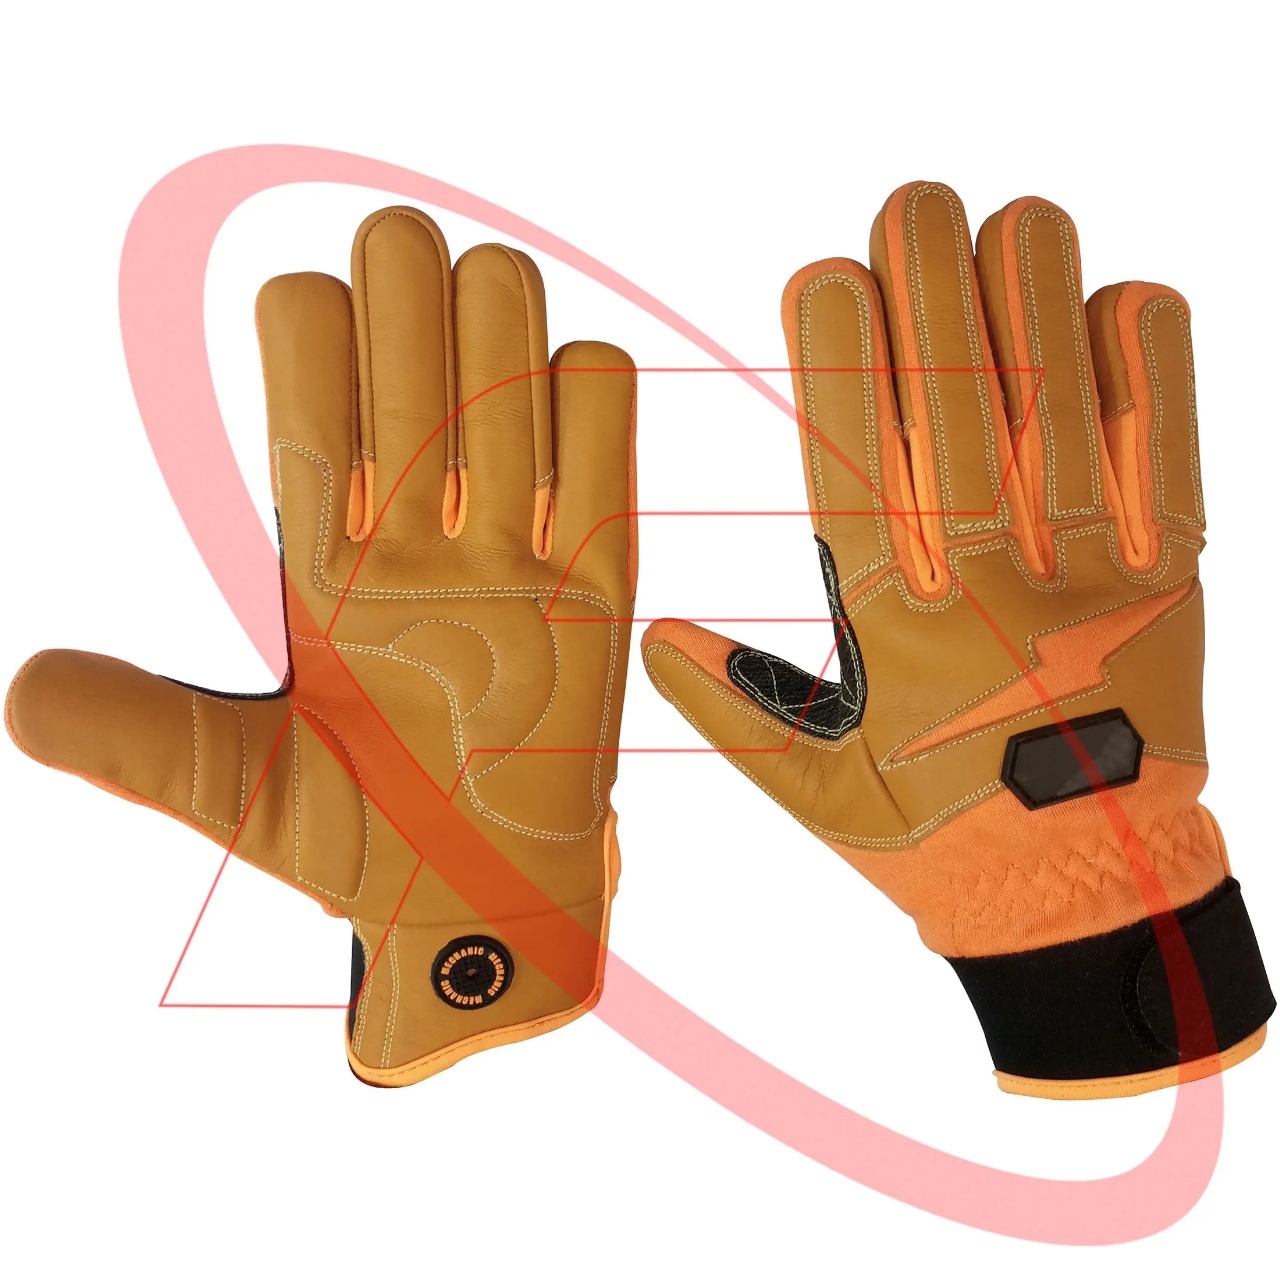 Mechanic Gloves for Oil and Gas Industries in Goat Leather Palm Leather Mechanical Gloves